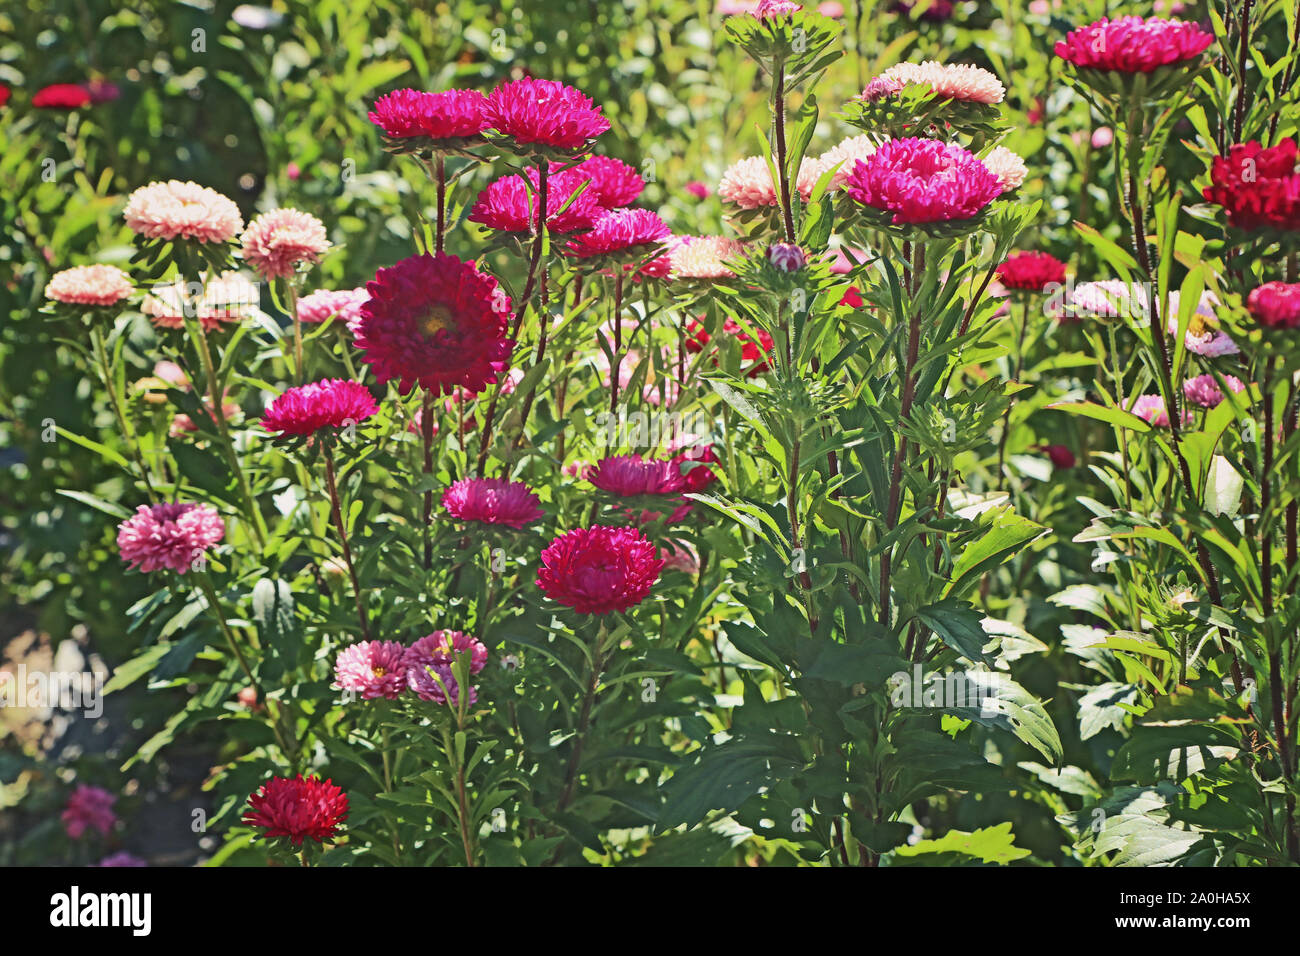 Aster plant cultivation in Bavaria in summer, colorful flowers ready to be cut for the market Stock Photo